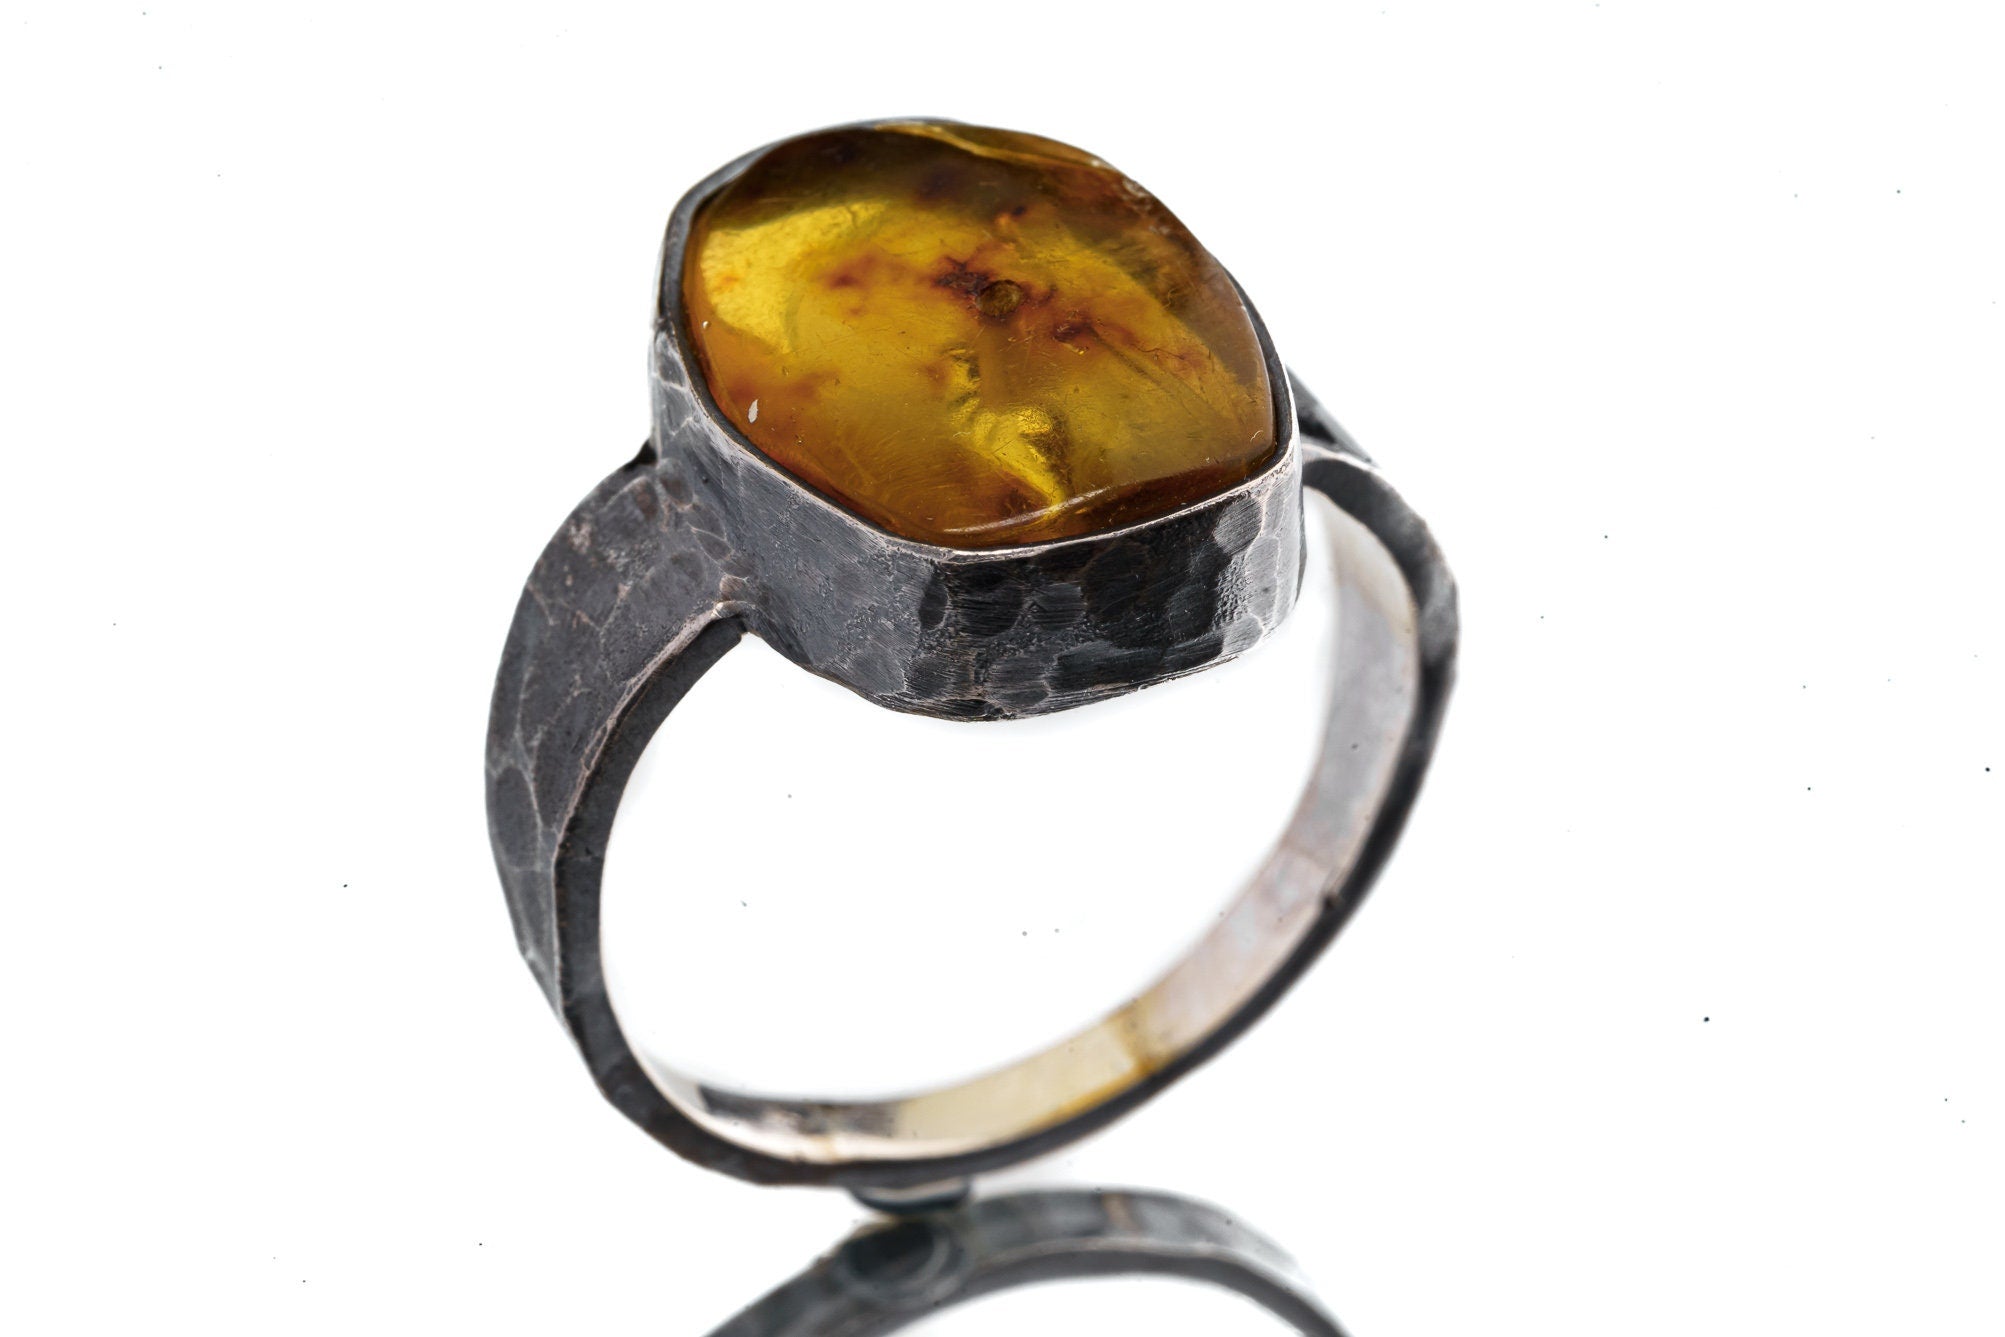 Freeform Mexican Amber Beat - Unisex / Men - Large Crystal Ring - Size 14 US - 925 Sterling Silver - Hammer Textured & Oxidised